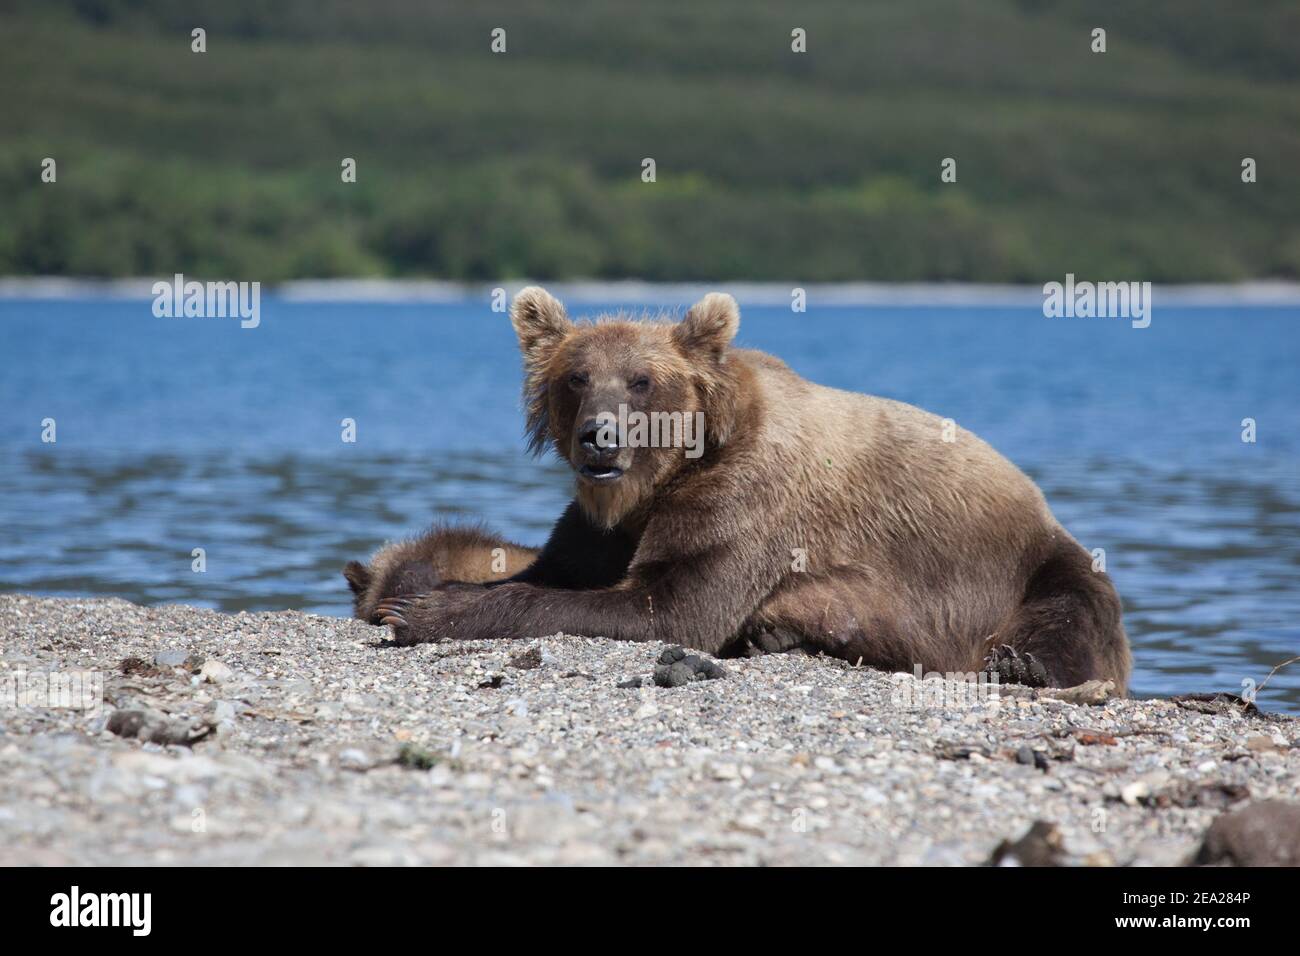 Grizzly bear cubs is on lake. Concept wildlife Stock Photo